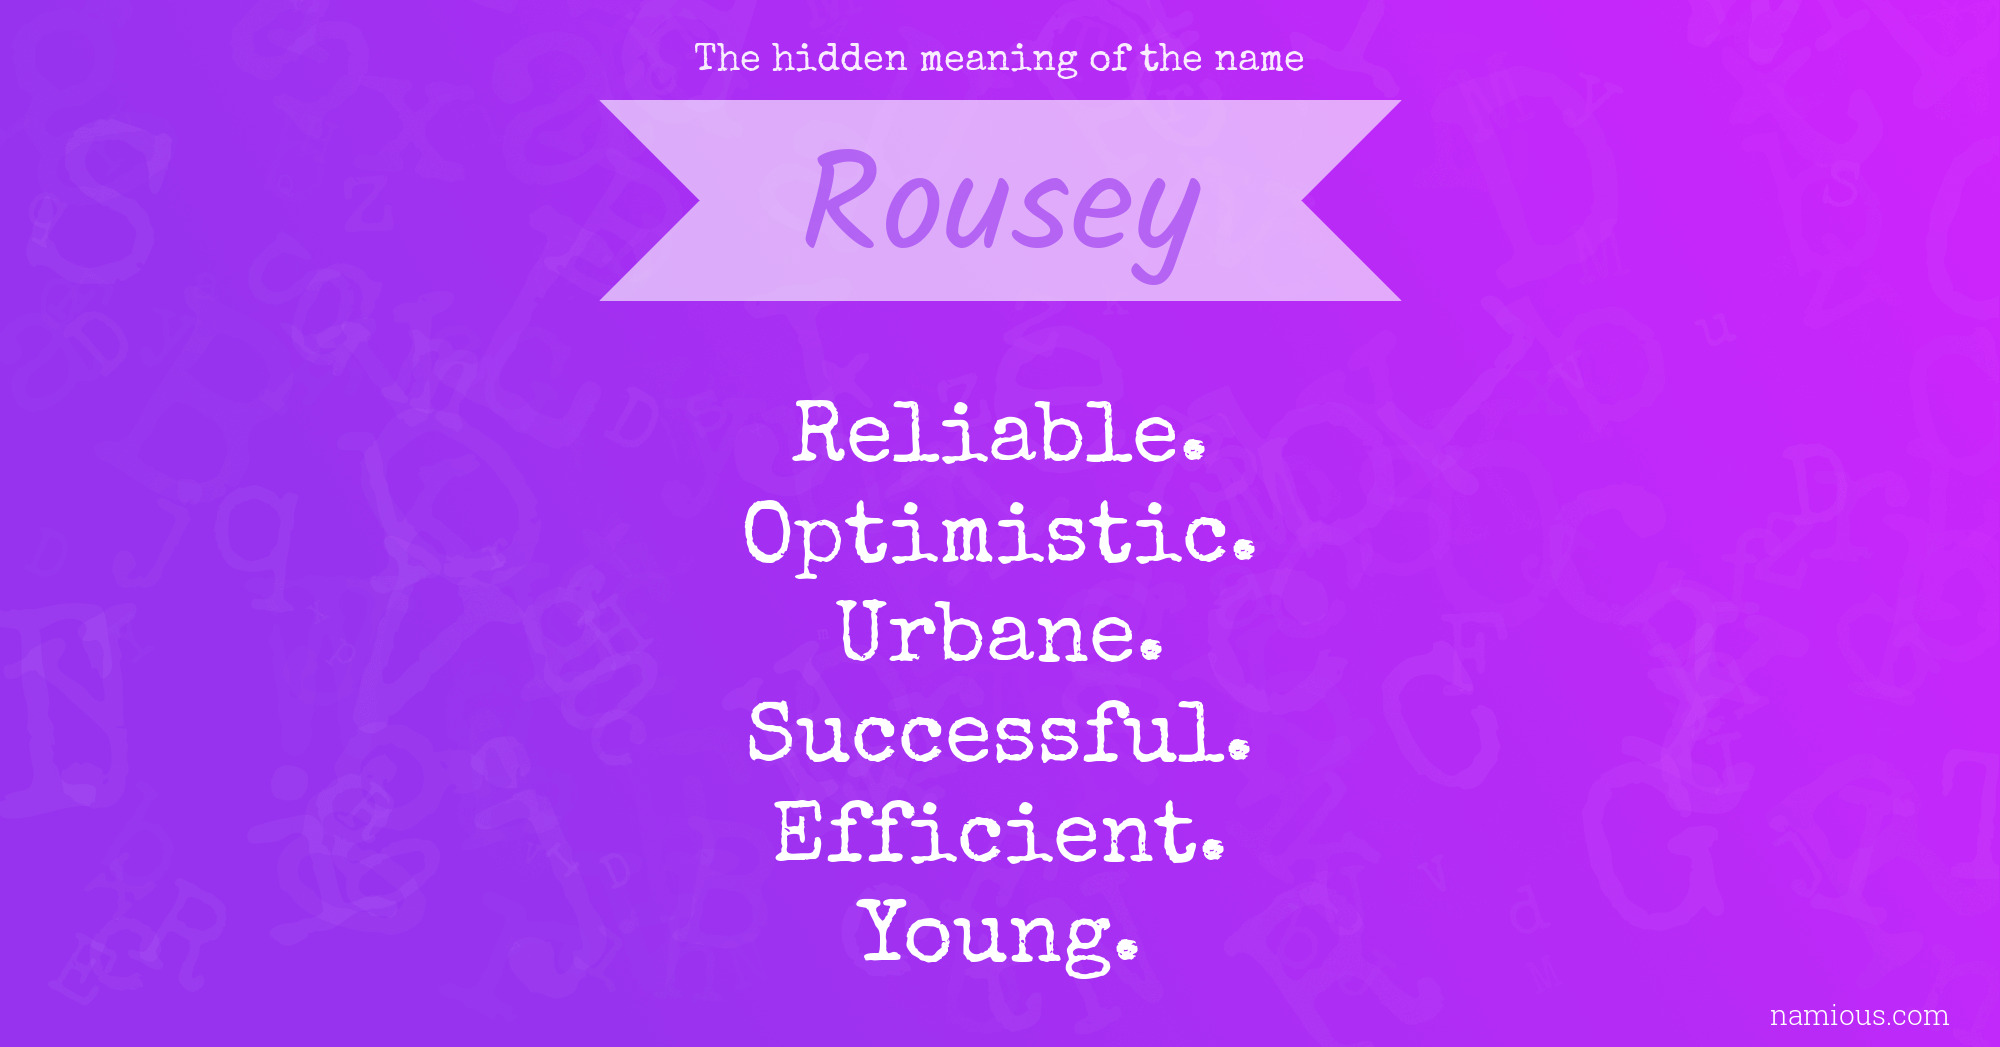 The hidden meaning of the name Rousey